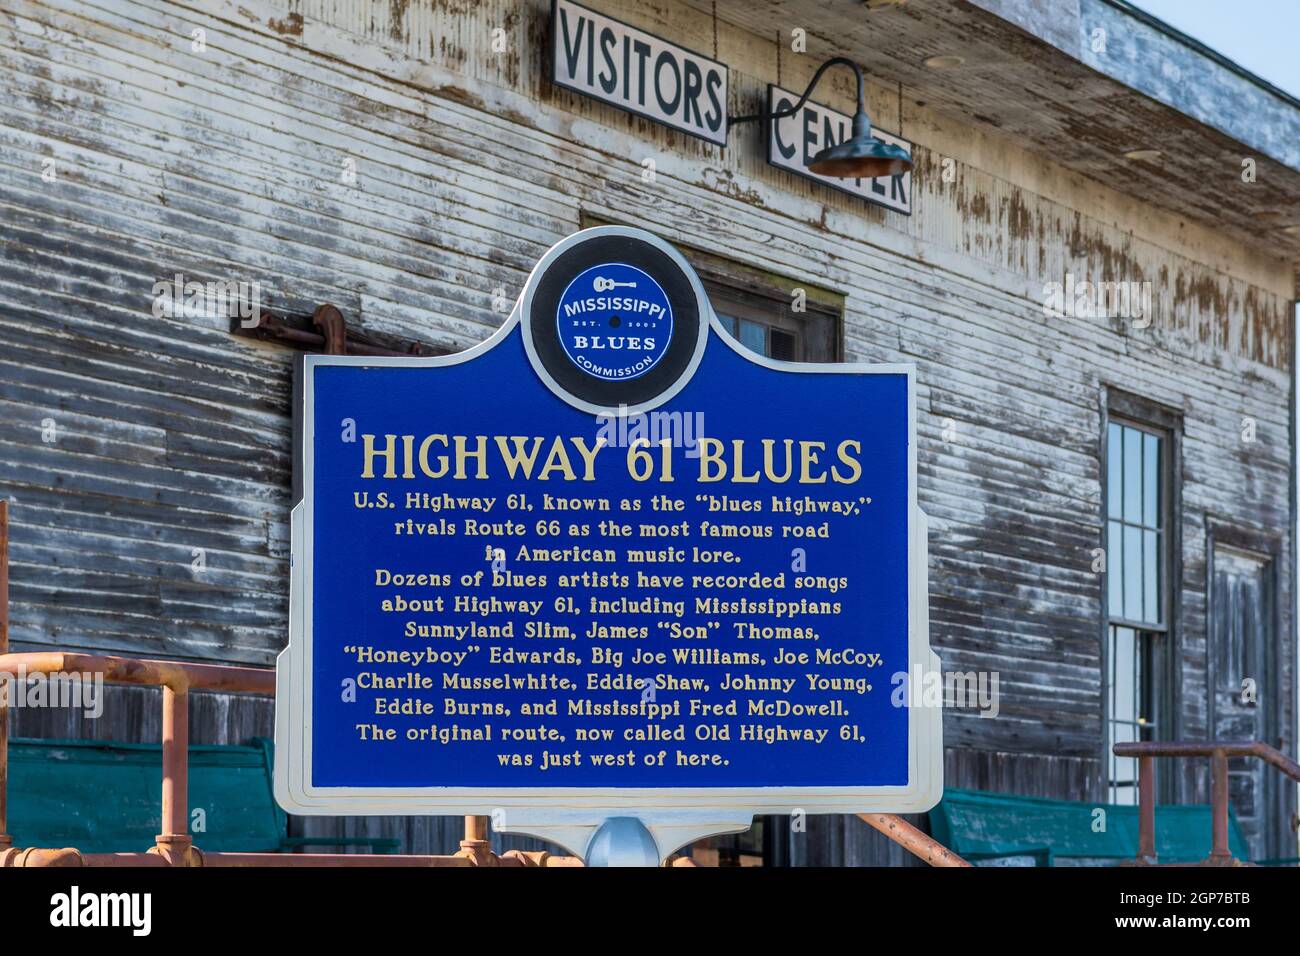 Highway 61 Blues, Gateway to the Blues Visitor Center in Tunica, Mississippi, USA. Stock Photo